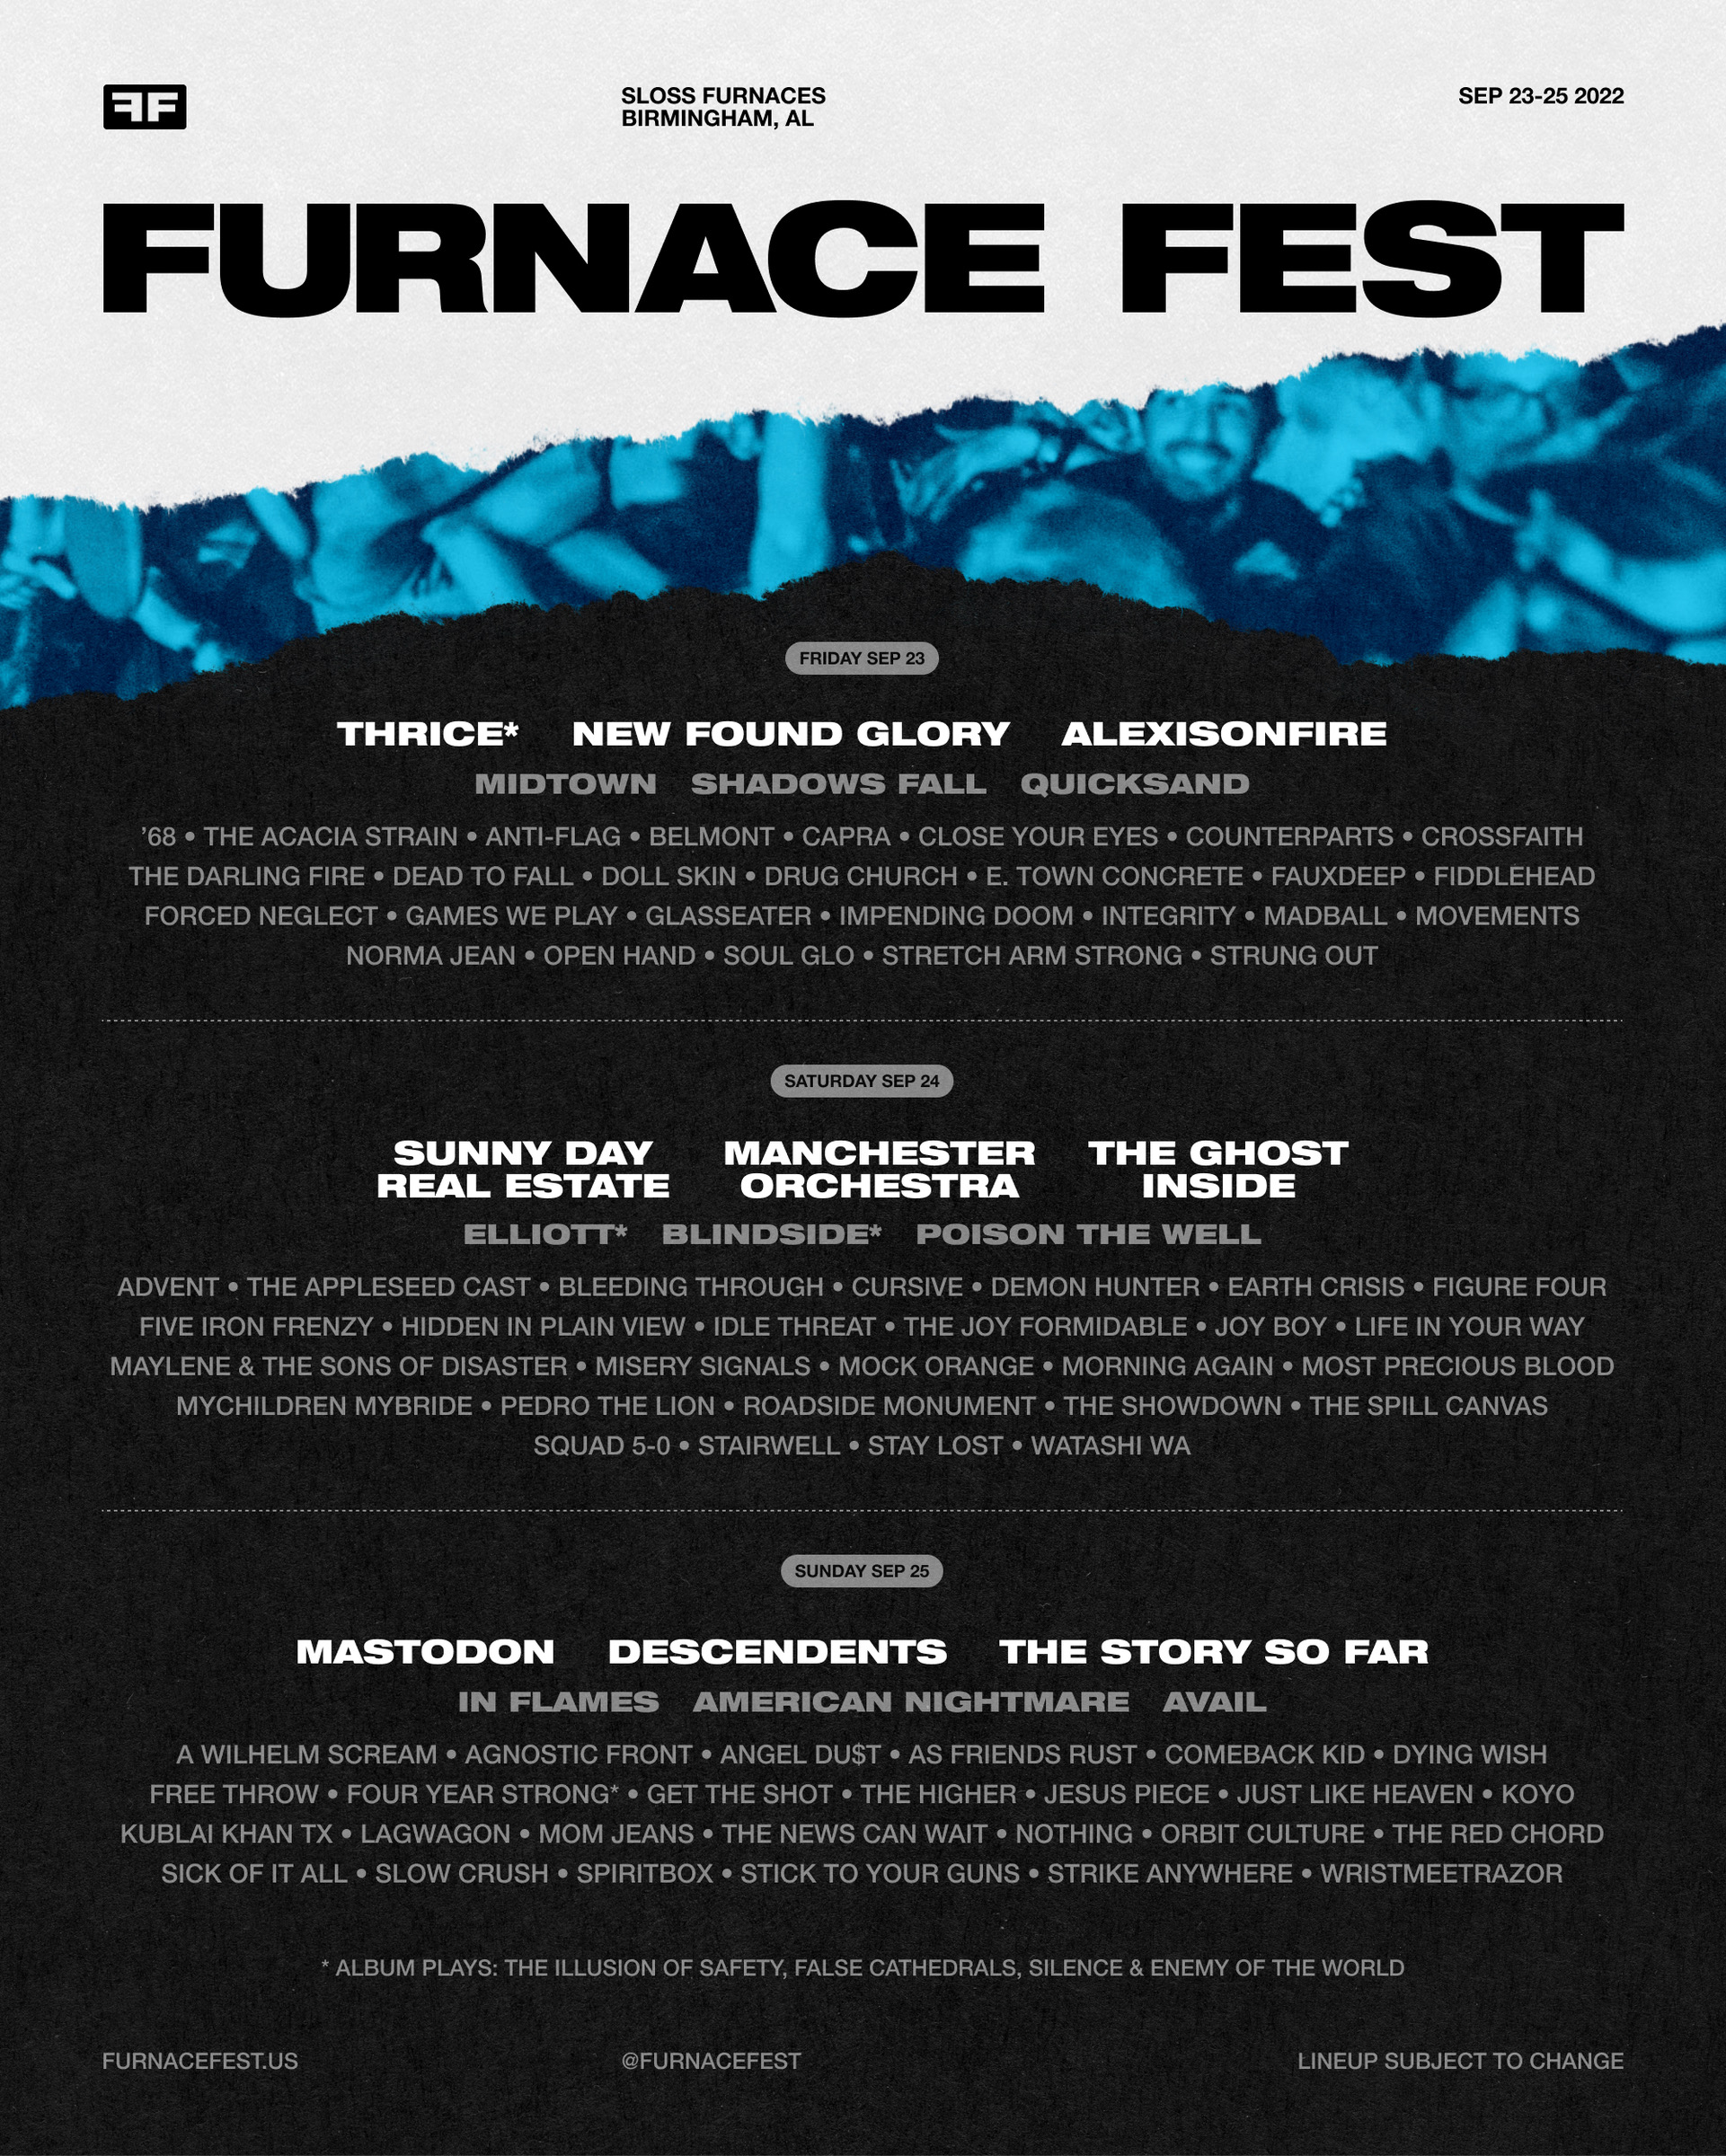 Sunny Day Real Estate Added to Furnace Fest Lineup SPIN